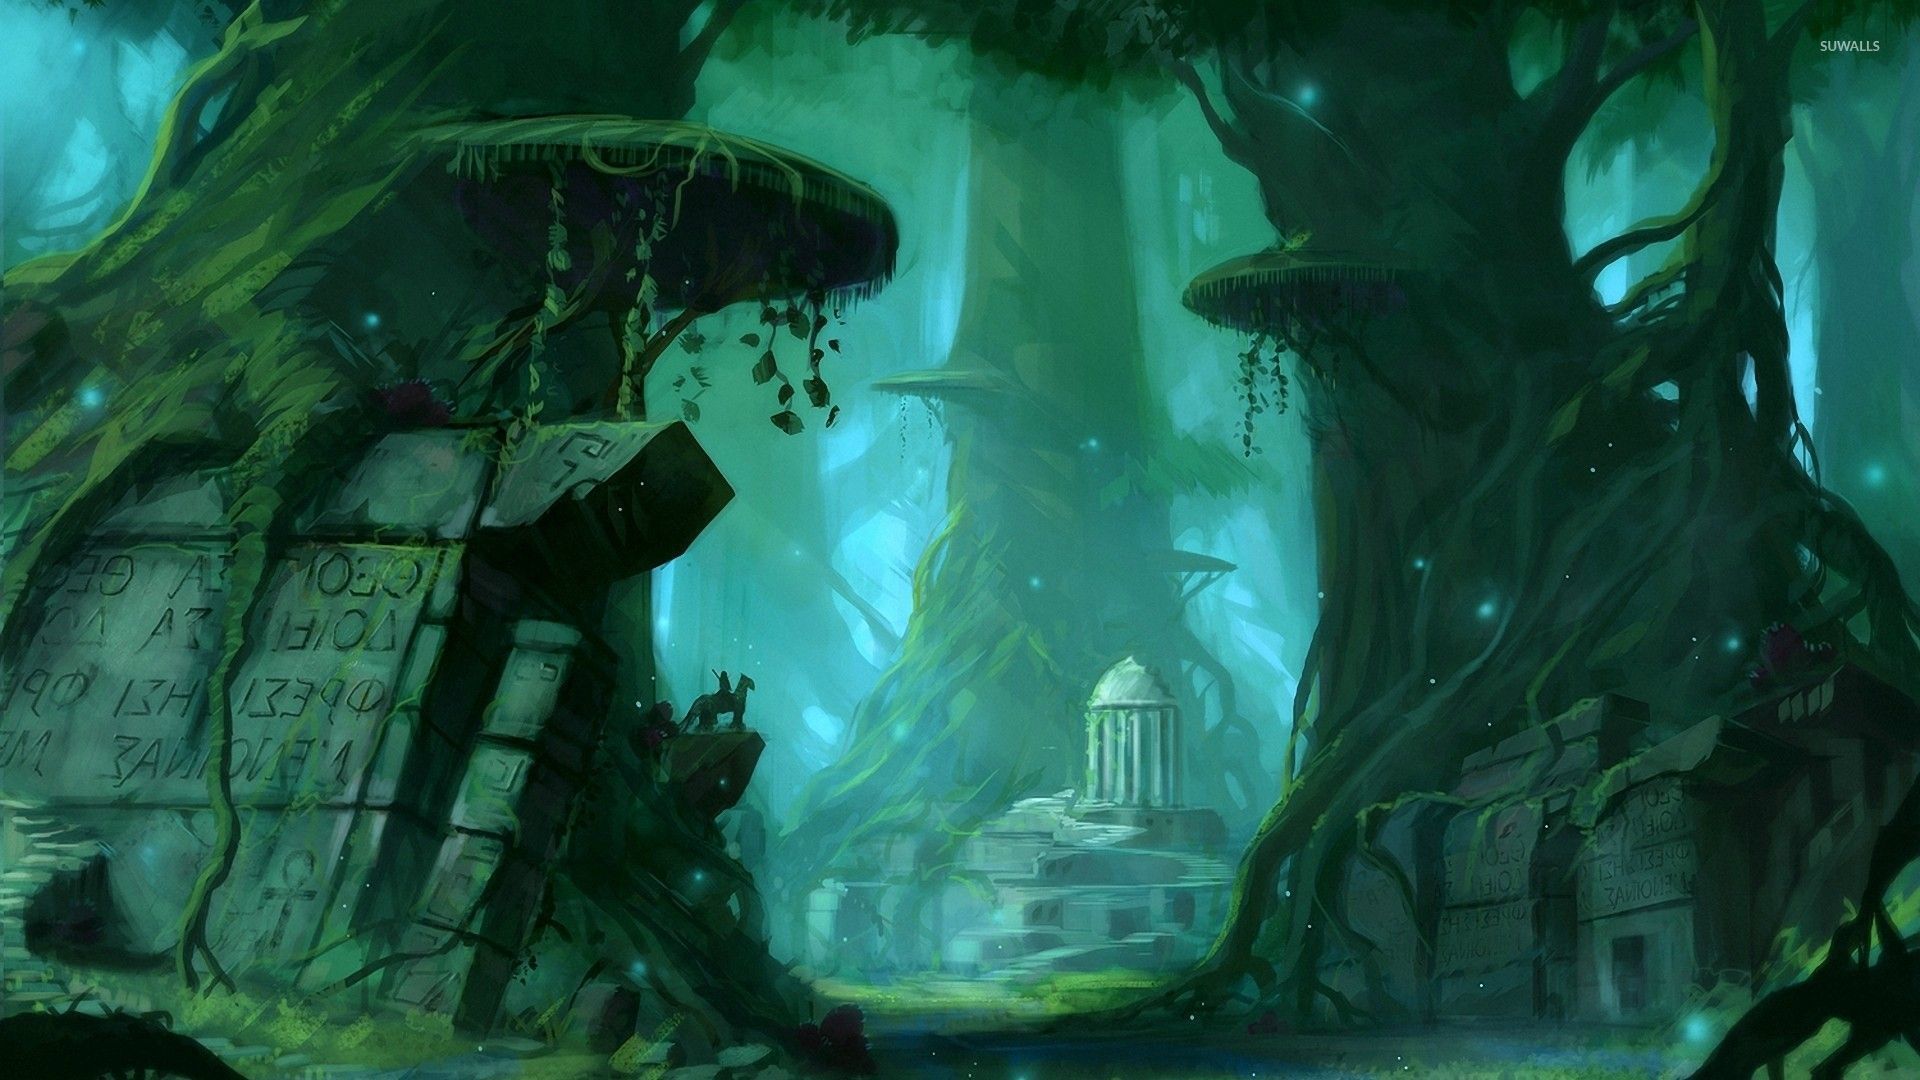 Ancient Temple Wallpaper Photo With Wallpaper Wide Resolution 1920x1080 px 259.73 KB. Fantasy landscape, Fantasy forest, Art